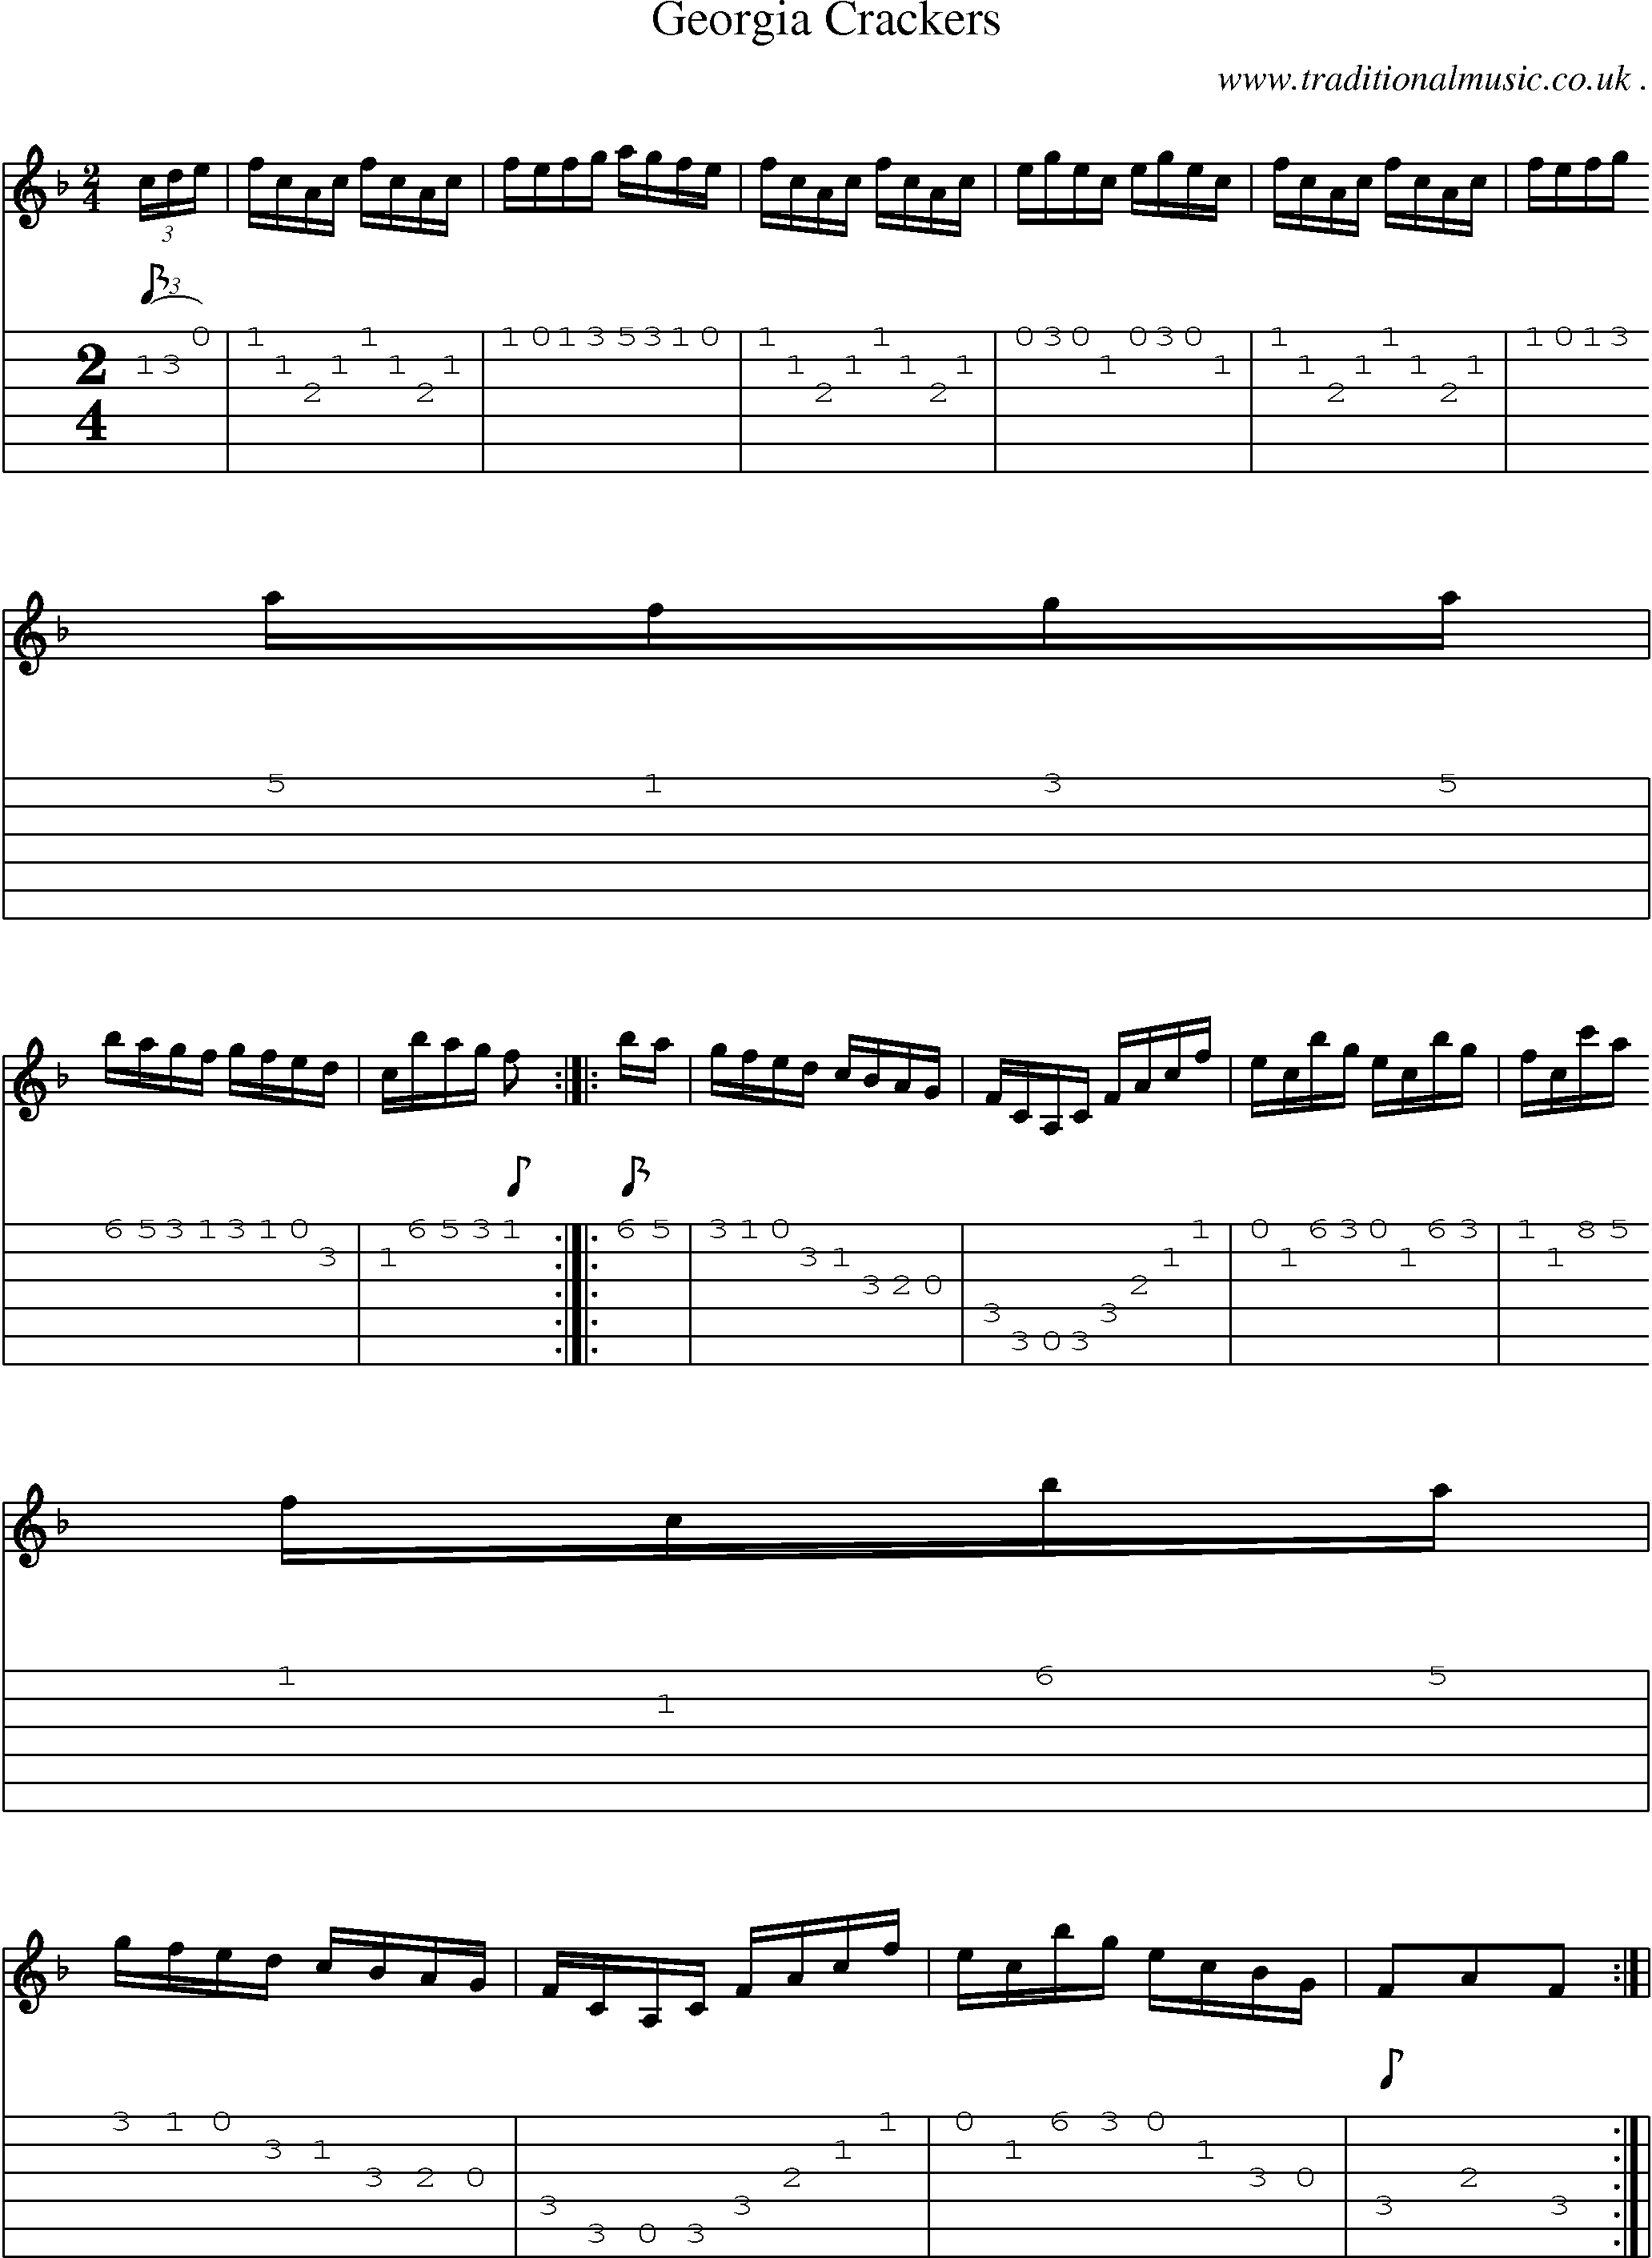 Sheet-Music and Guitar Tabs for Georgia Crackers